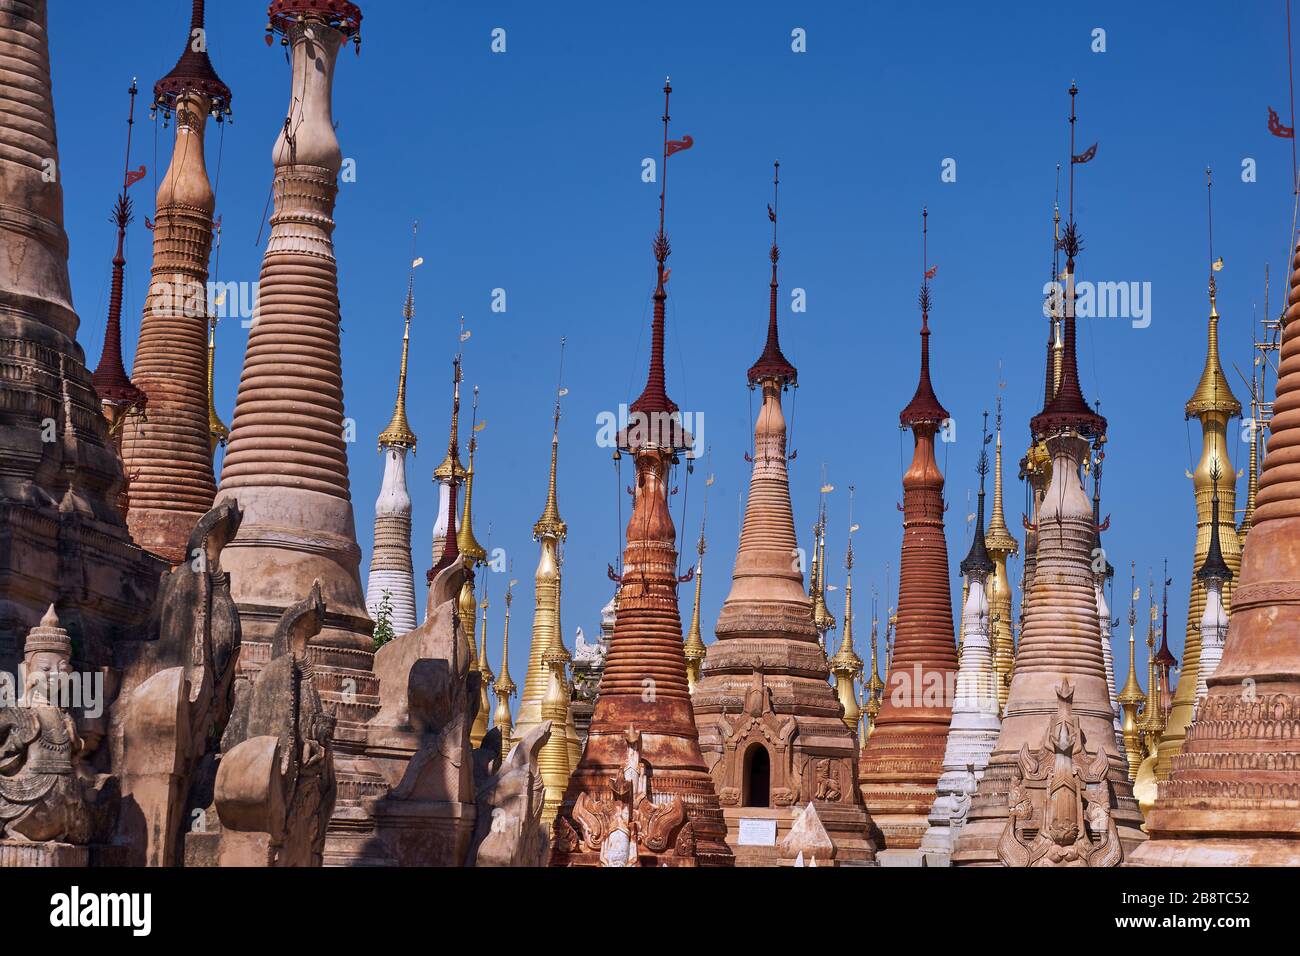 Grab-Stupas, In-Dein-Pagodenwald, Shwe Inn Thein-Pagode, Dorf Indein, Inle See, Shan-Staat, Myanmar Stockfoto